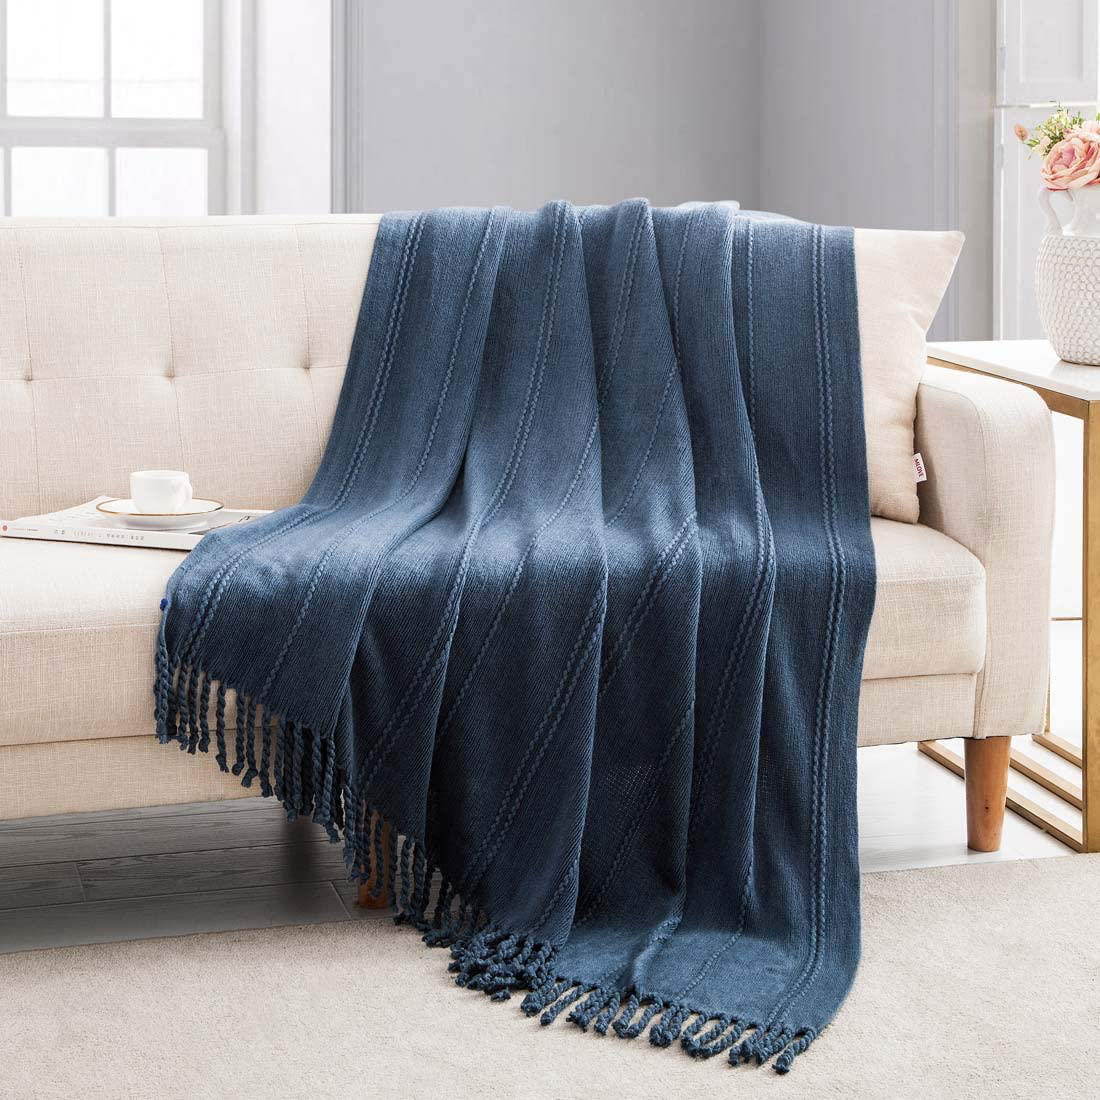 Revdomfly Knitted Throw Blanket Royal Blue Farmhouse Woven Blankets with Fringe Tassels for Couch Bed, 47" x 67", Royal Blue